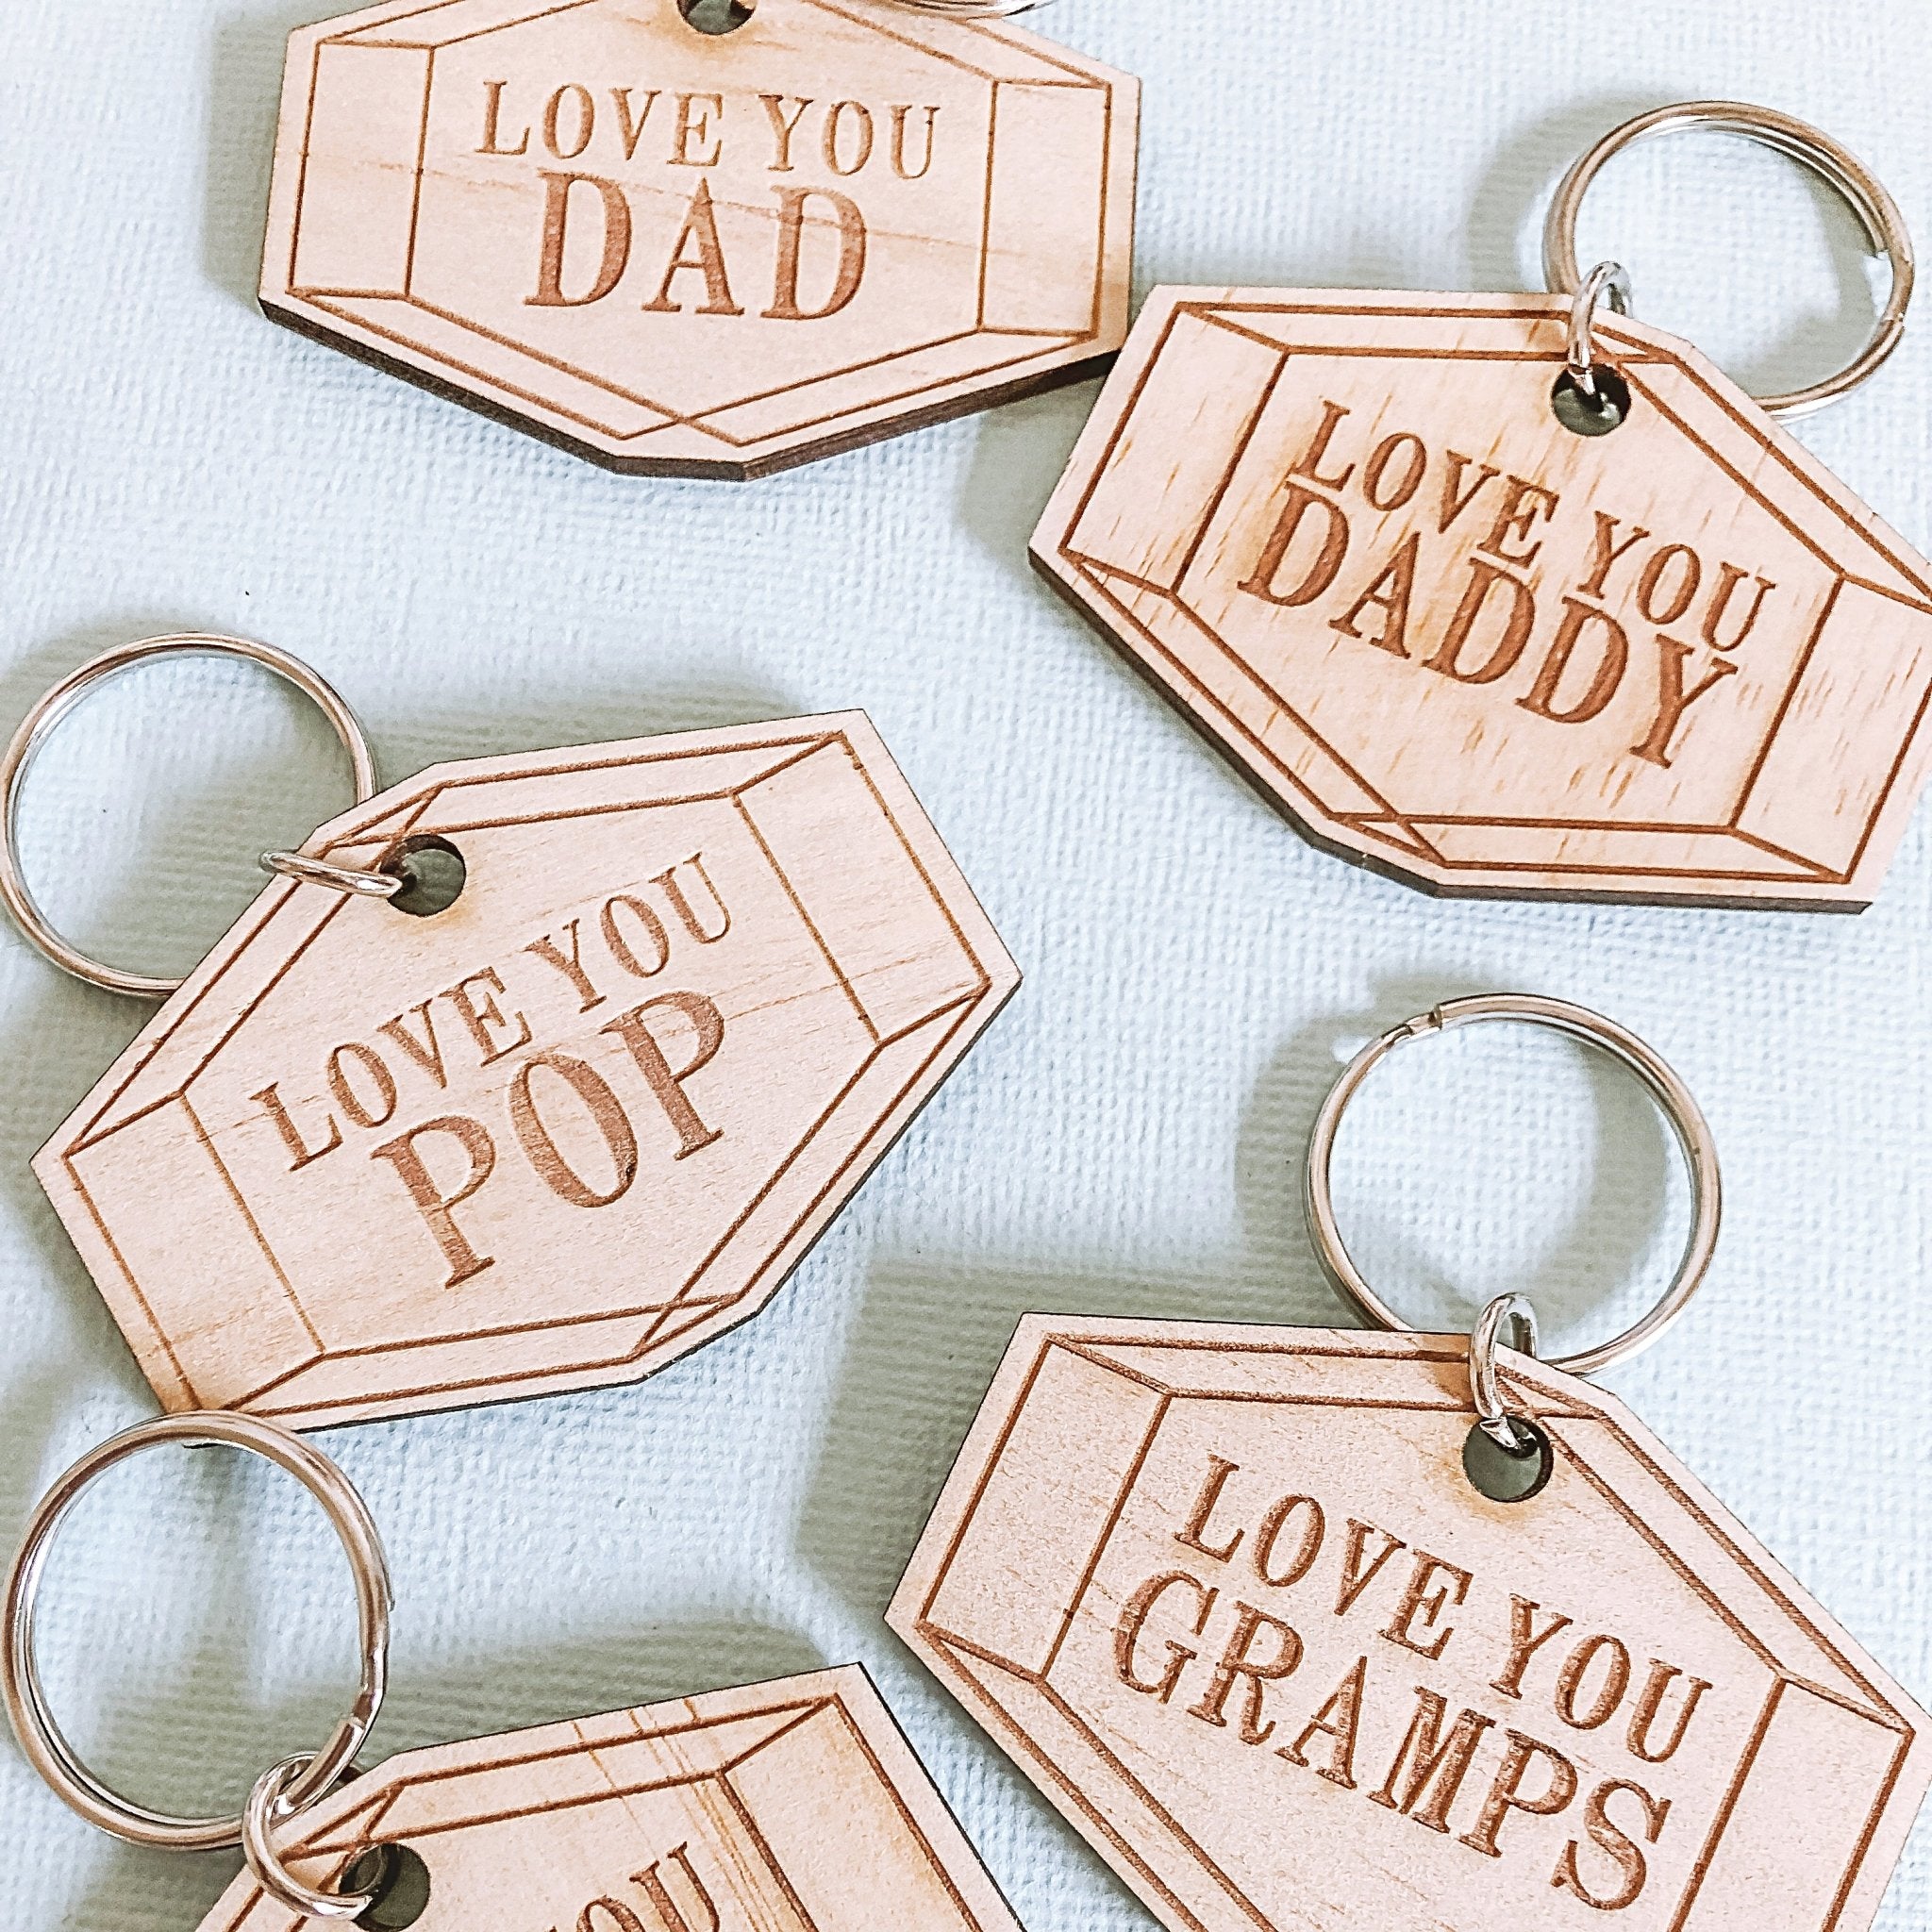 Father's Day Keychain Key Chain Affordable Gifts DAD Grandad Australian Handmade  Personalised Keepsakes Hard to find Gifts